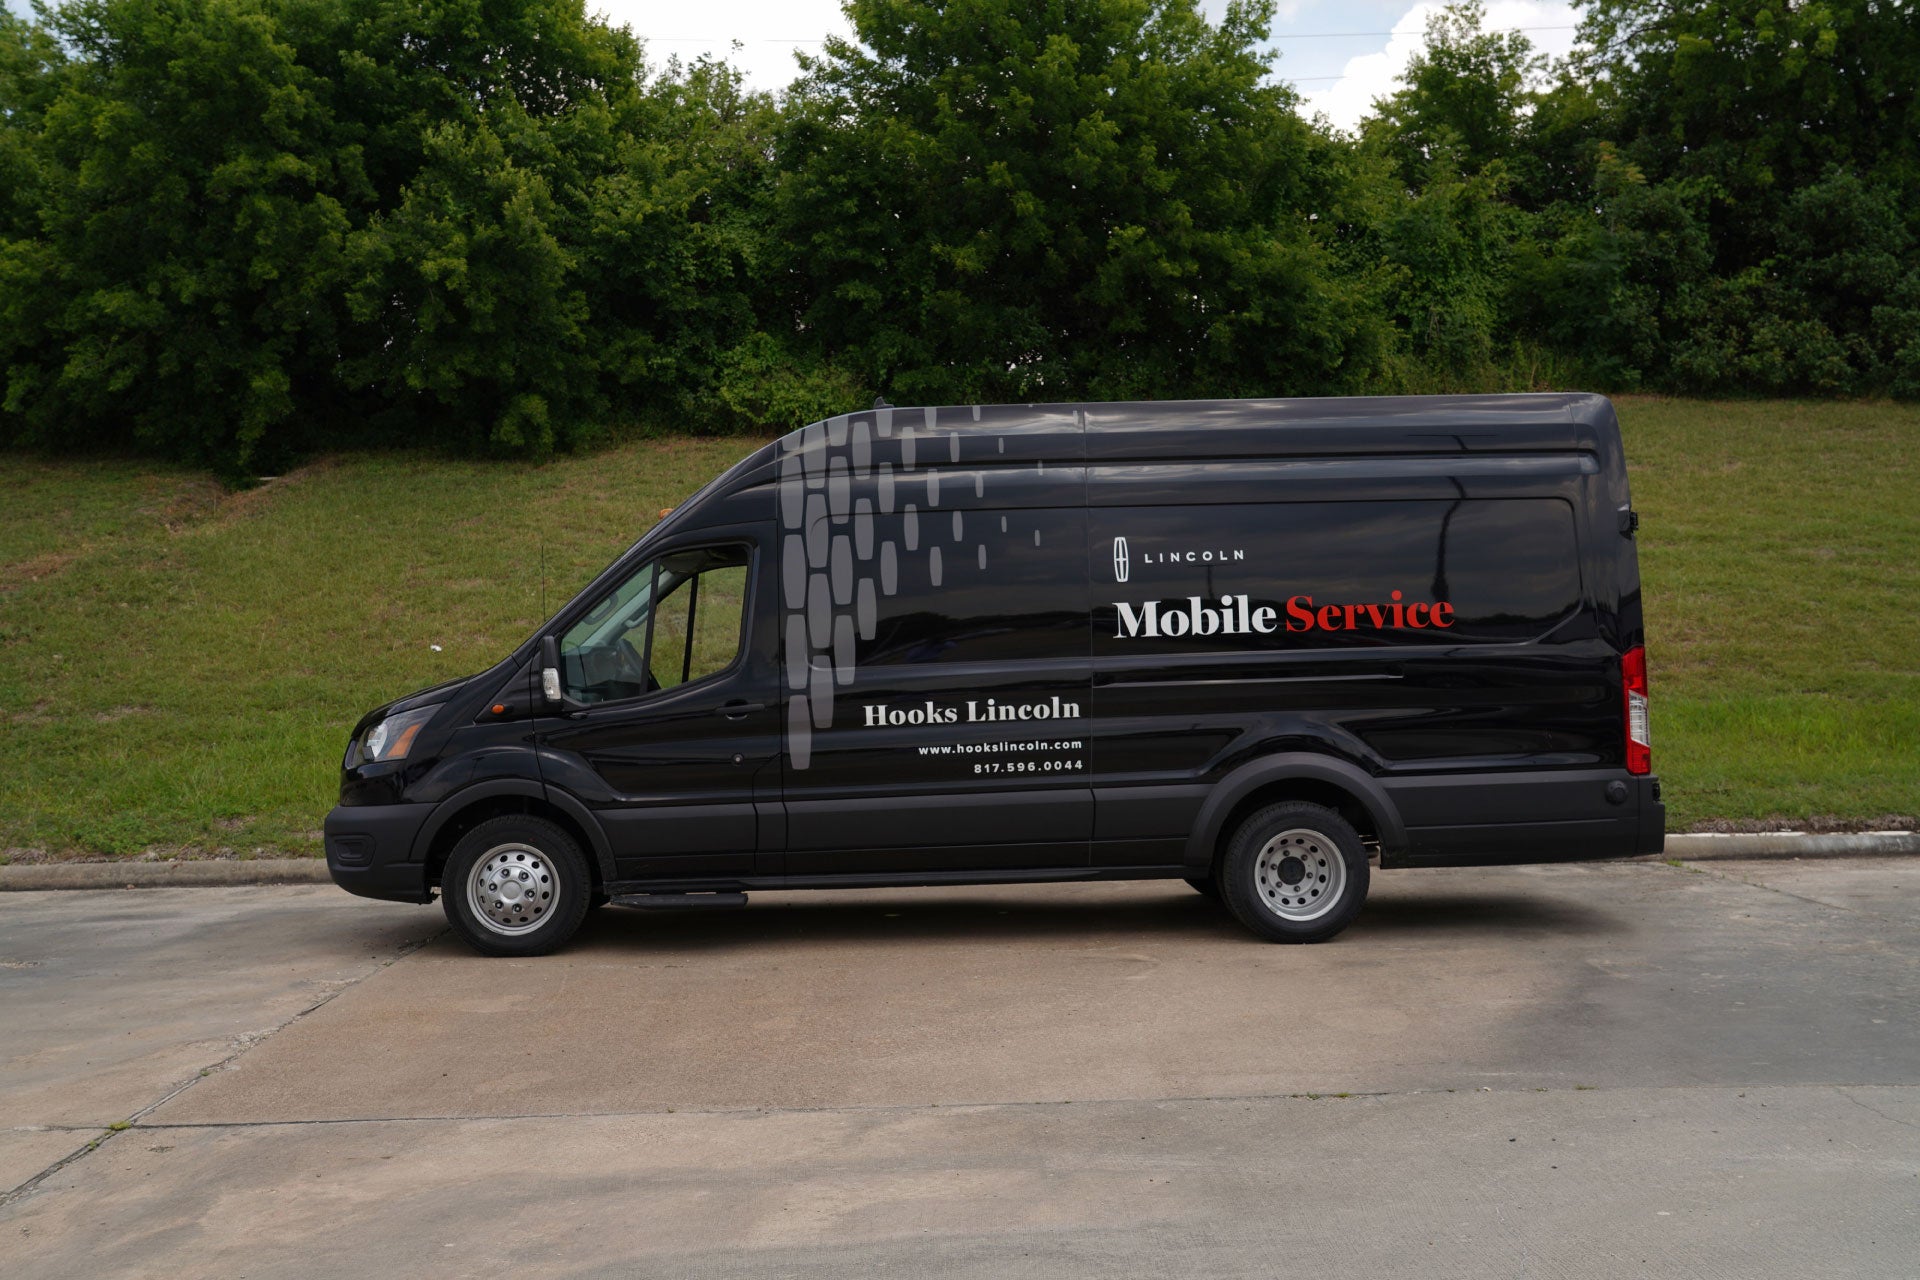 Mobile Service Van Exterior Image Two